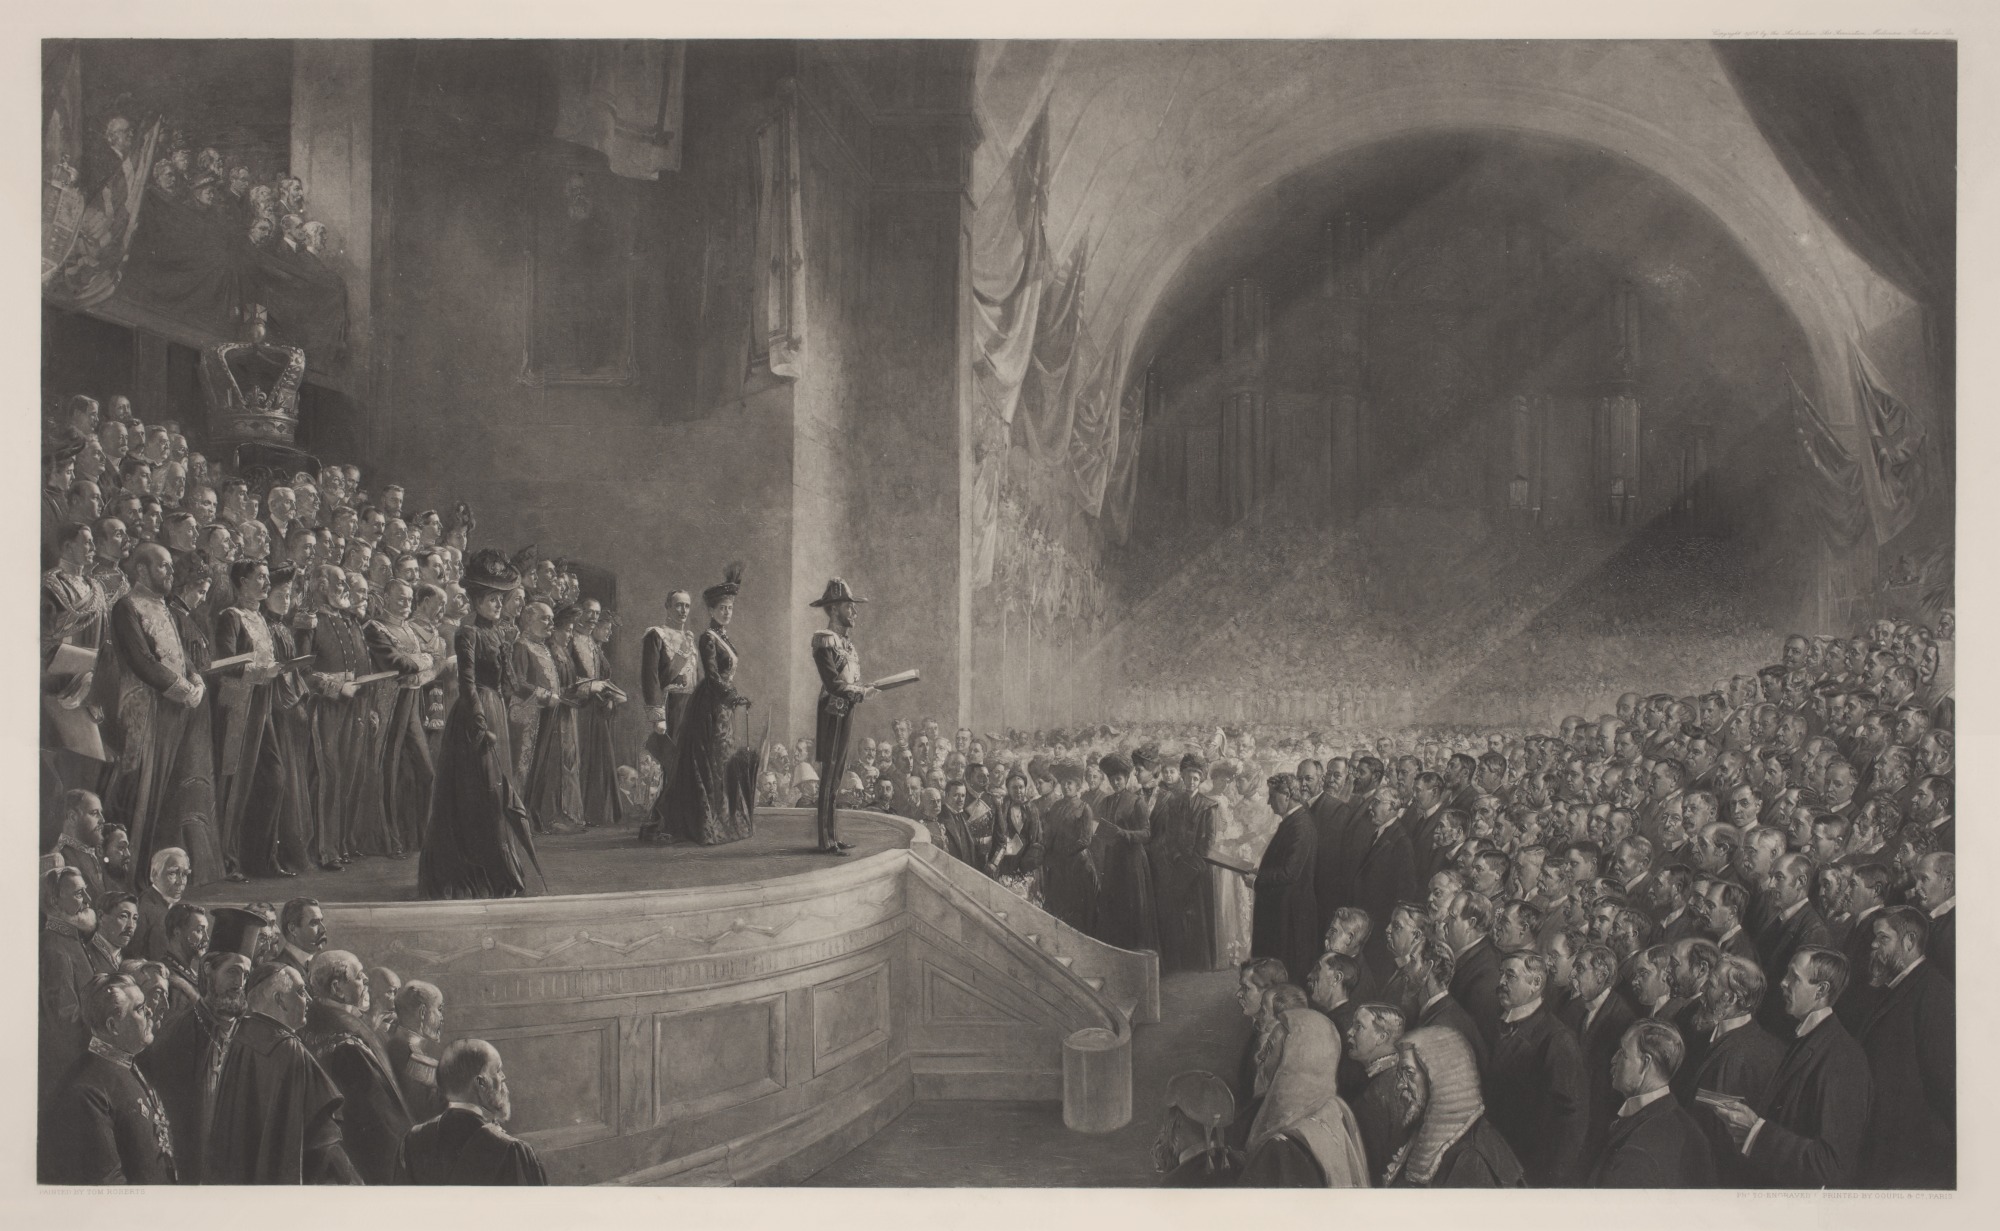 Opening of the First Parliament of the Commonwealth of Australia by HRH The Duke of Cornwall and York (Later HM King George V), May 9, 1901, by Tom Roberts. 